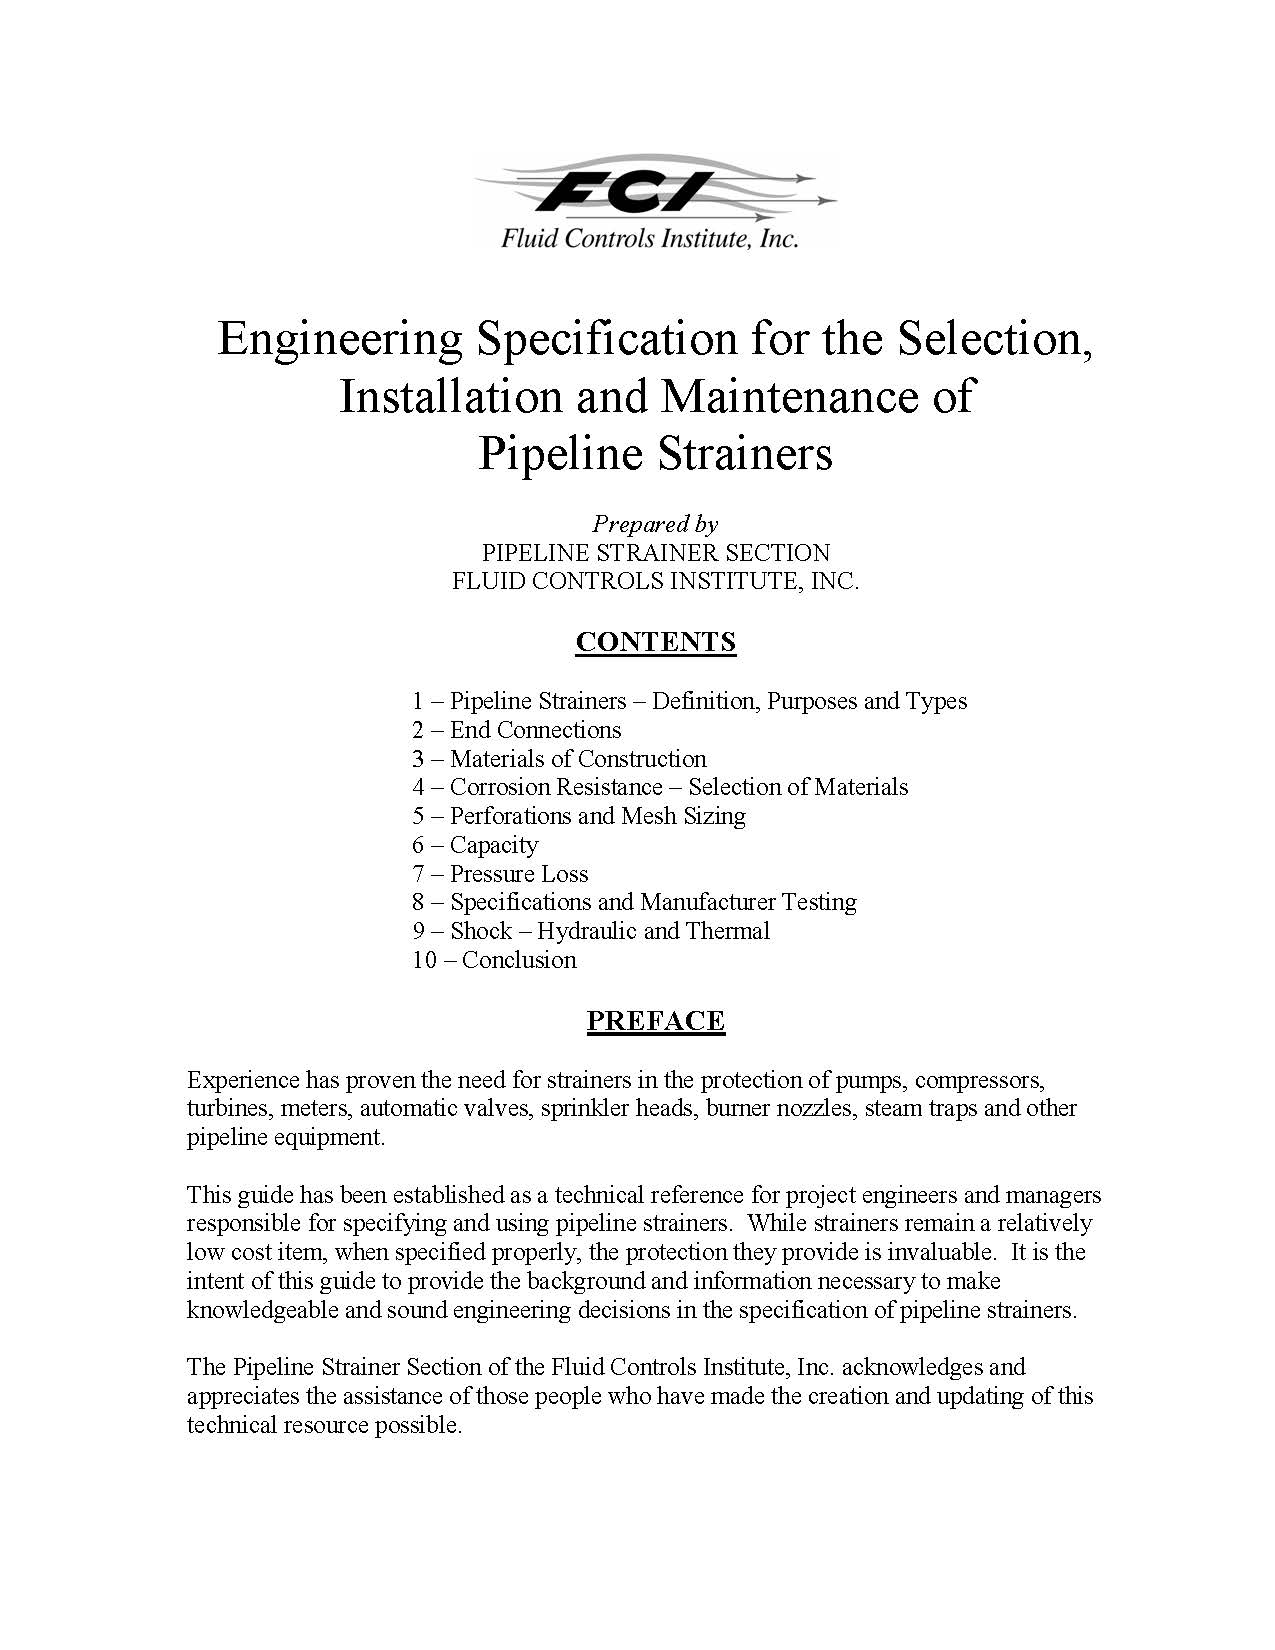 Engineering Specification for the Selection, Installation and Maintenance of Pipeline Strainers